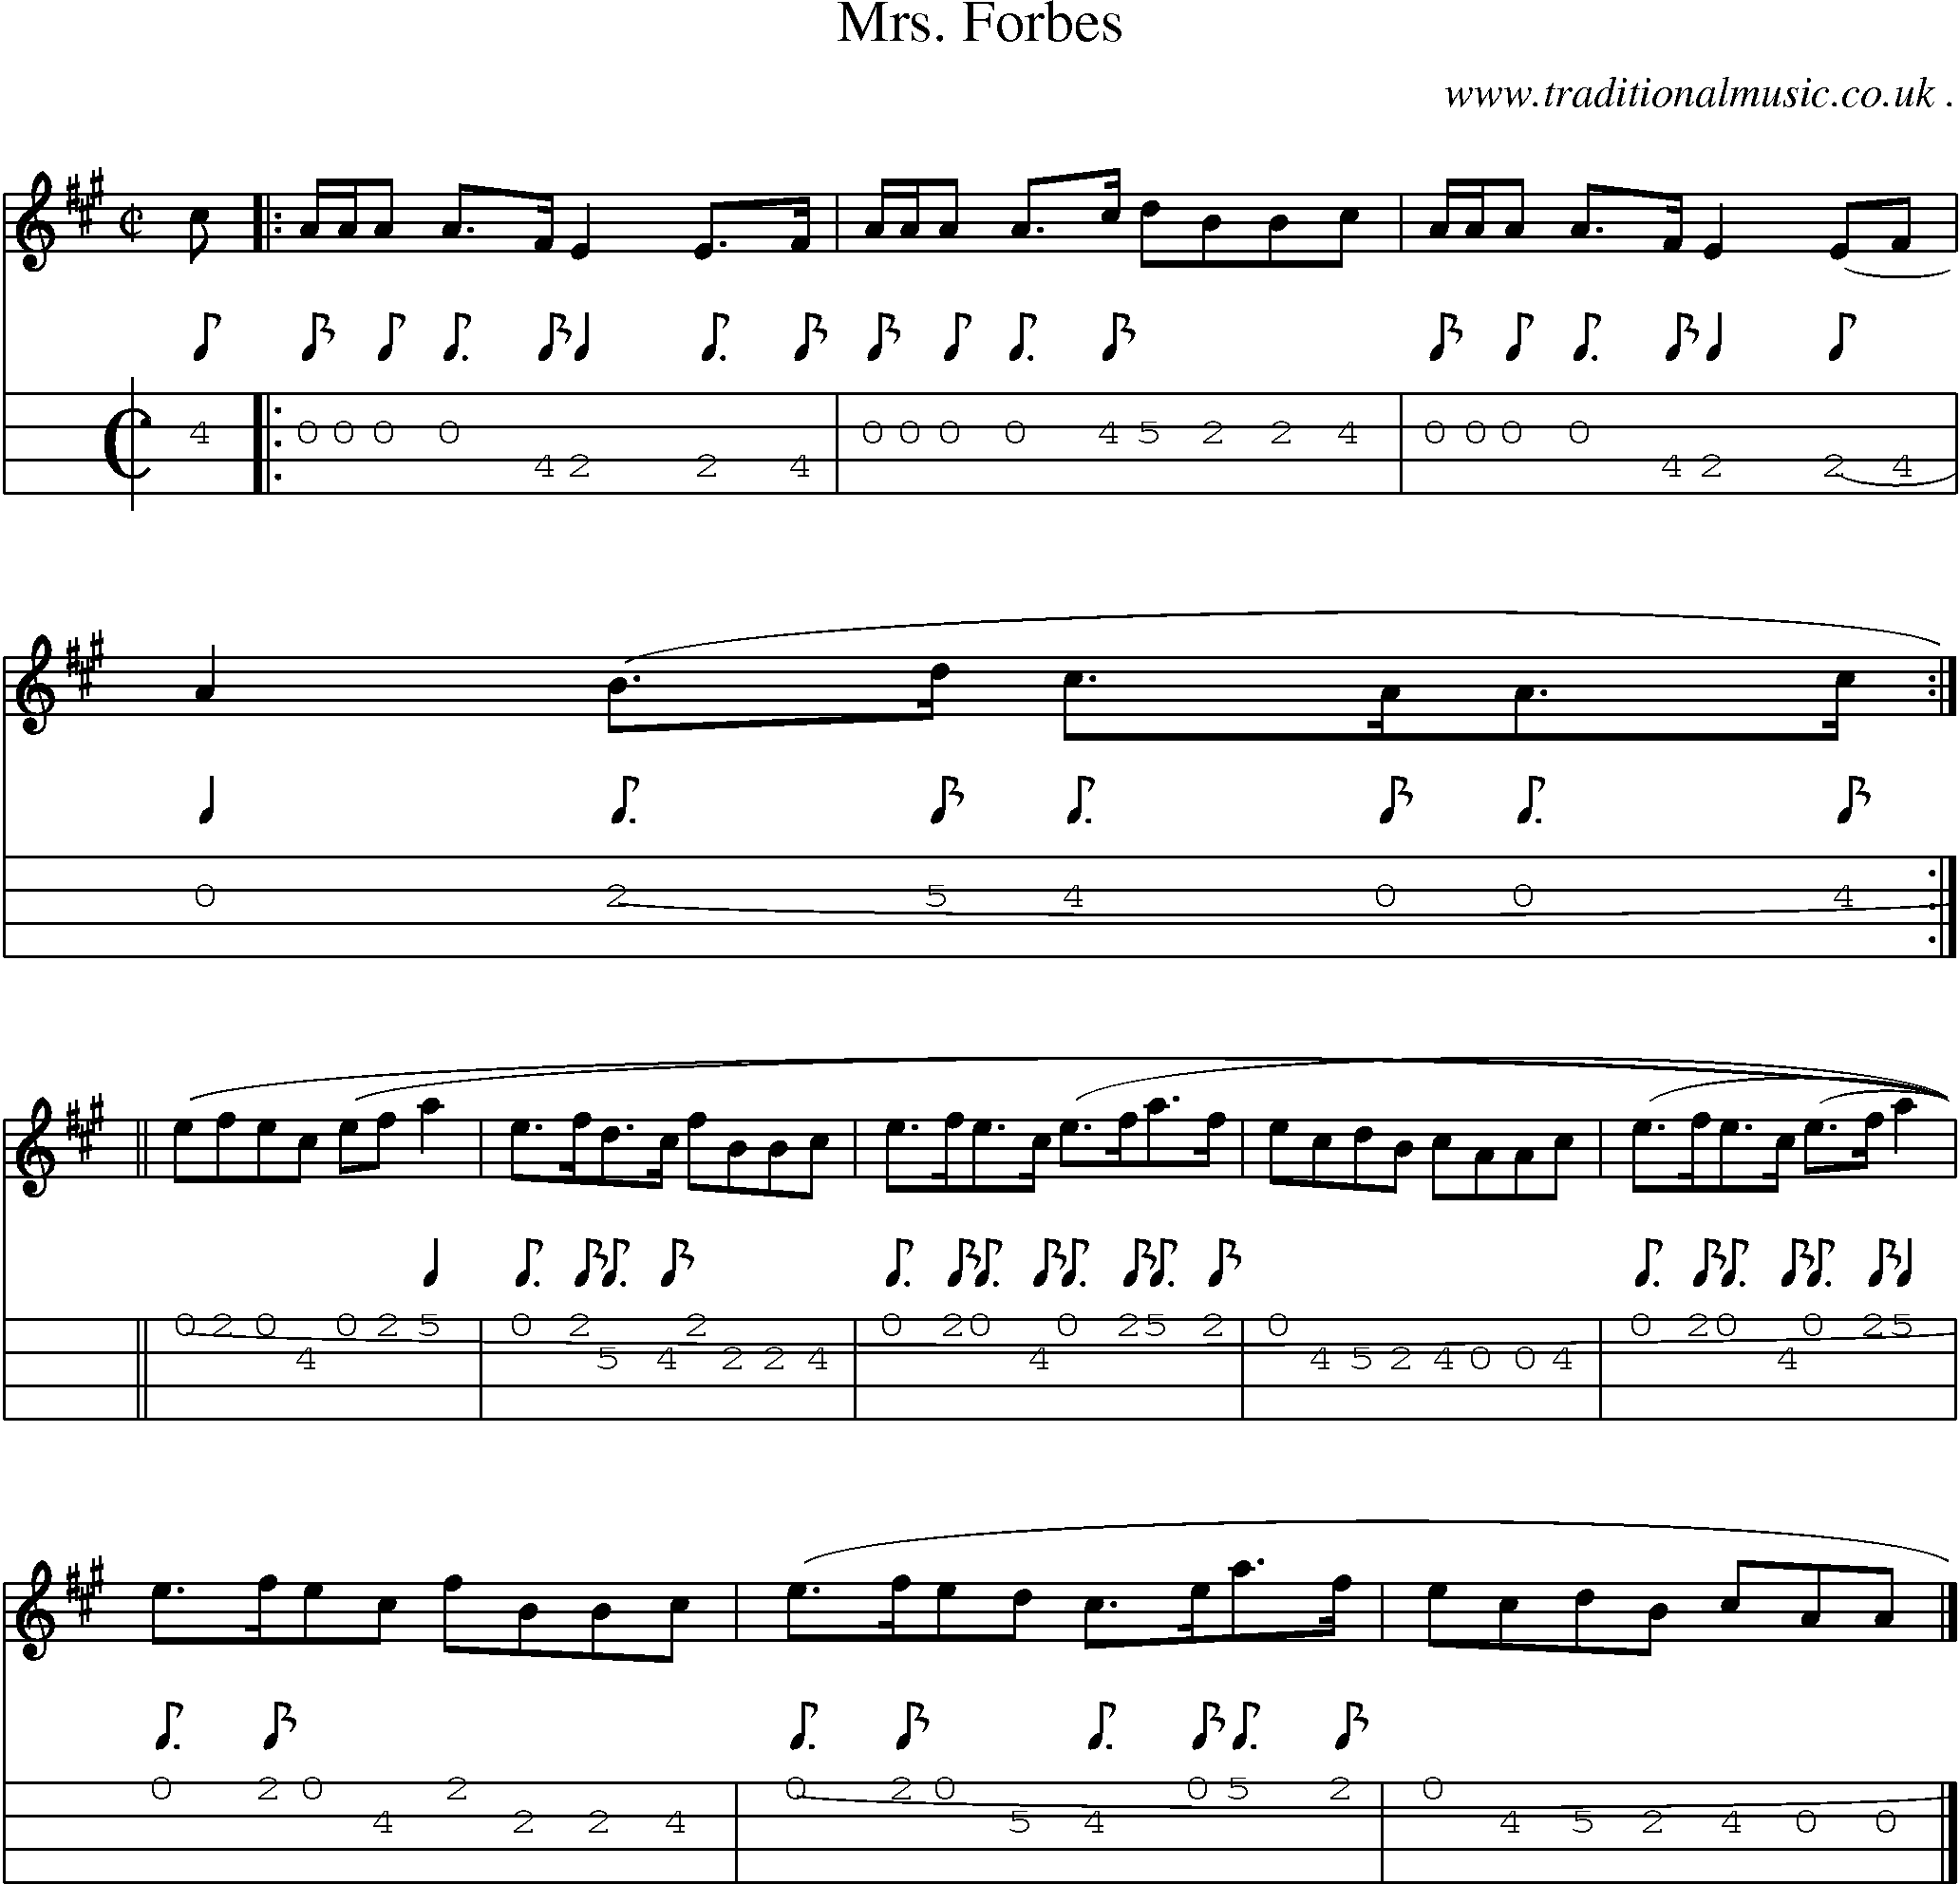 Sheet-music  score, Chords and Mandolin Tabs for Mrs Forbes